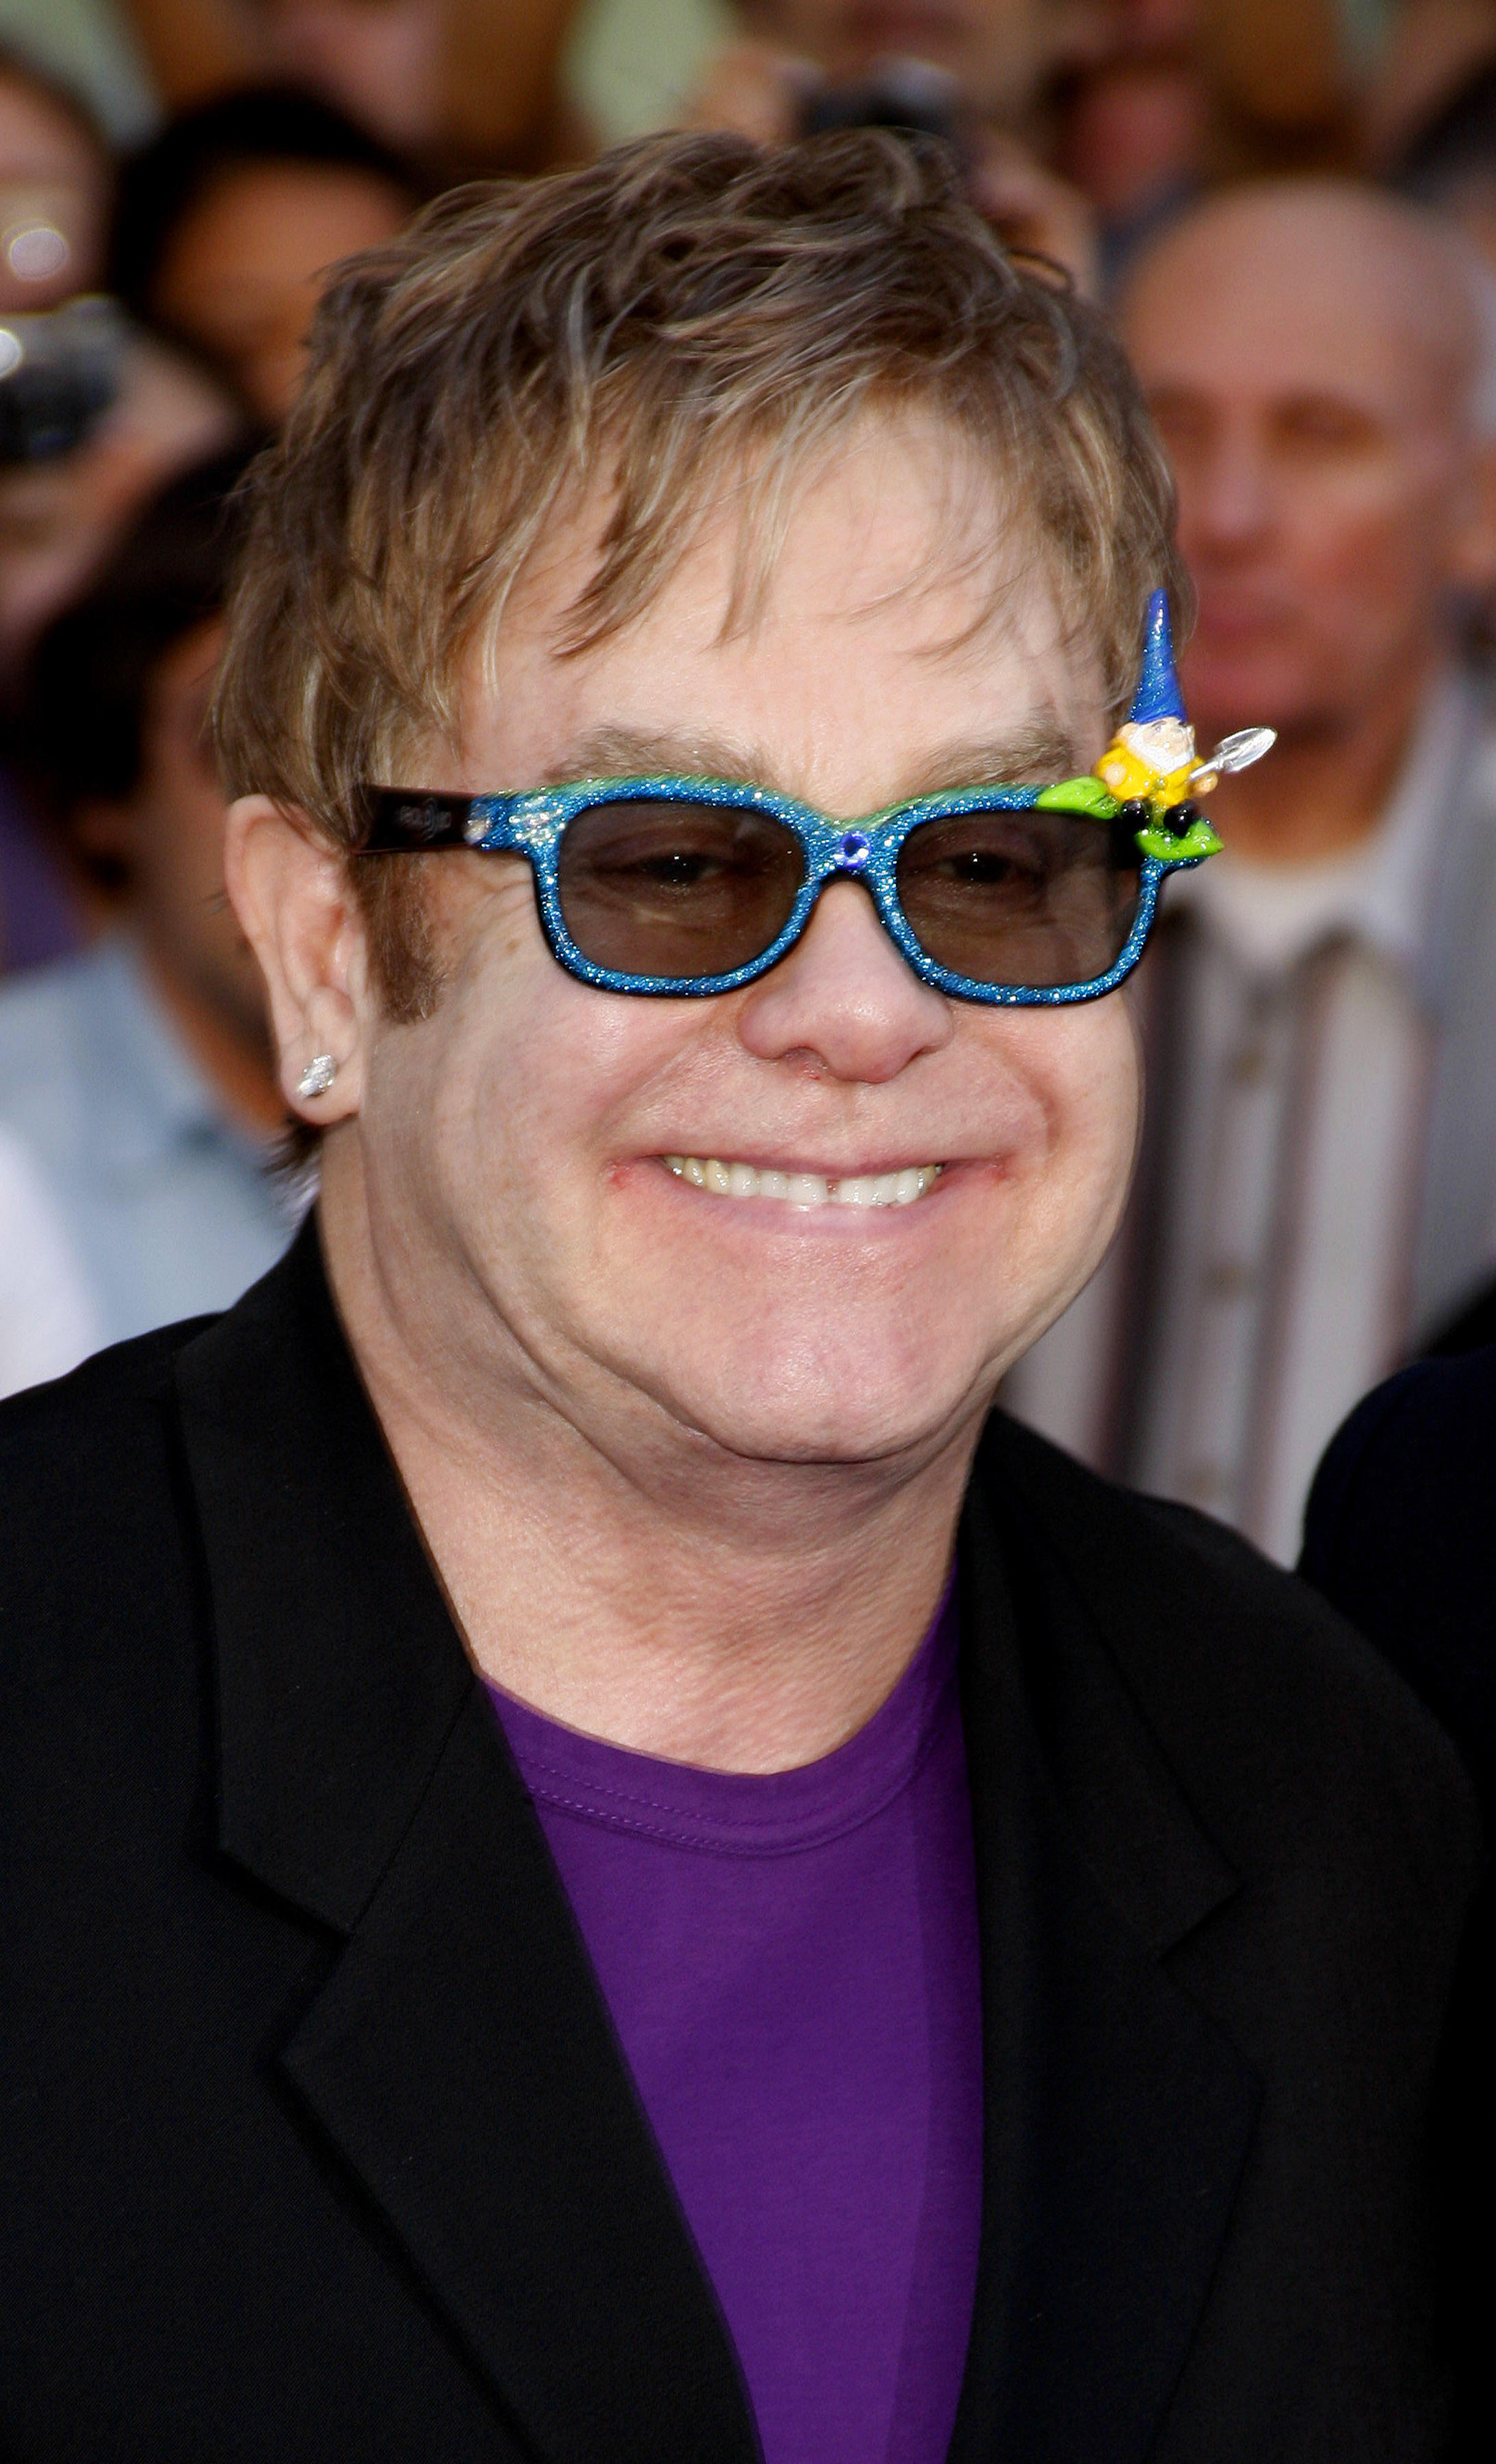 Elton John at the Los Angeles premiere of Gnomeo and Juliet